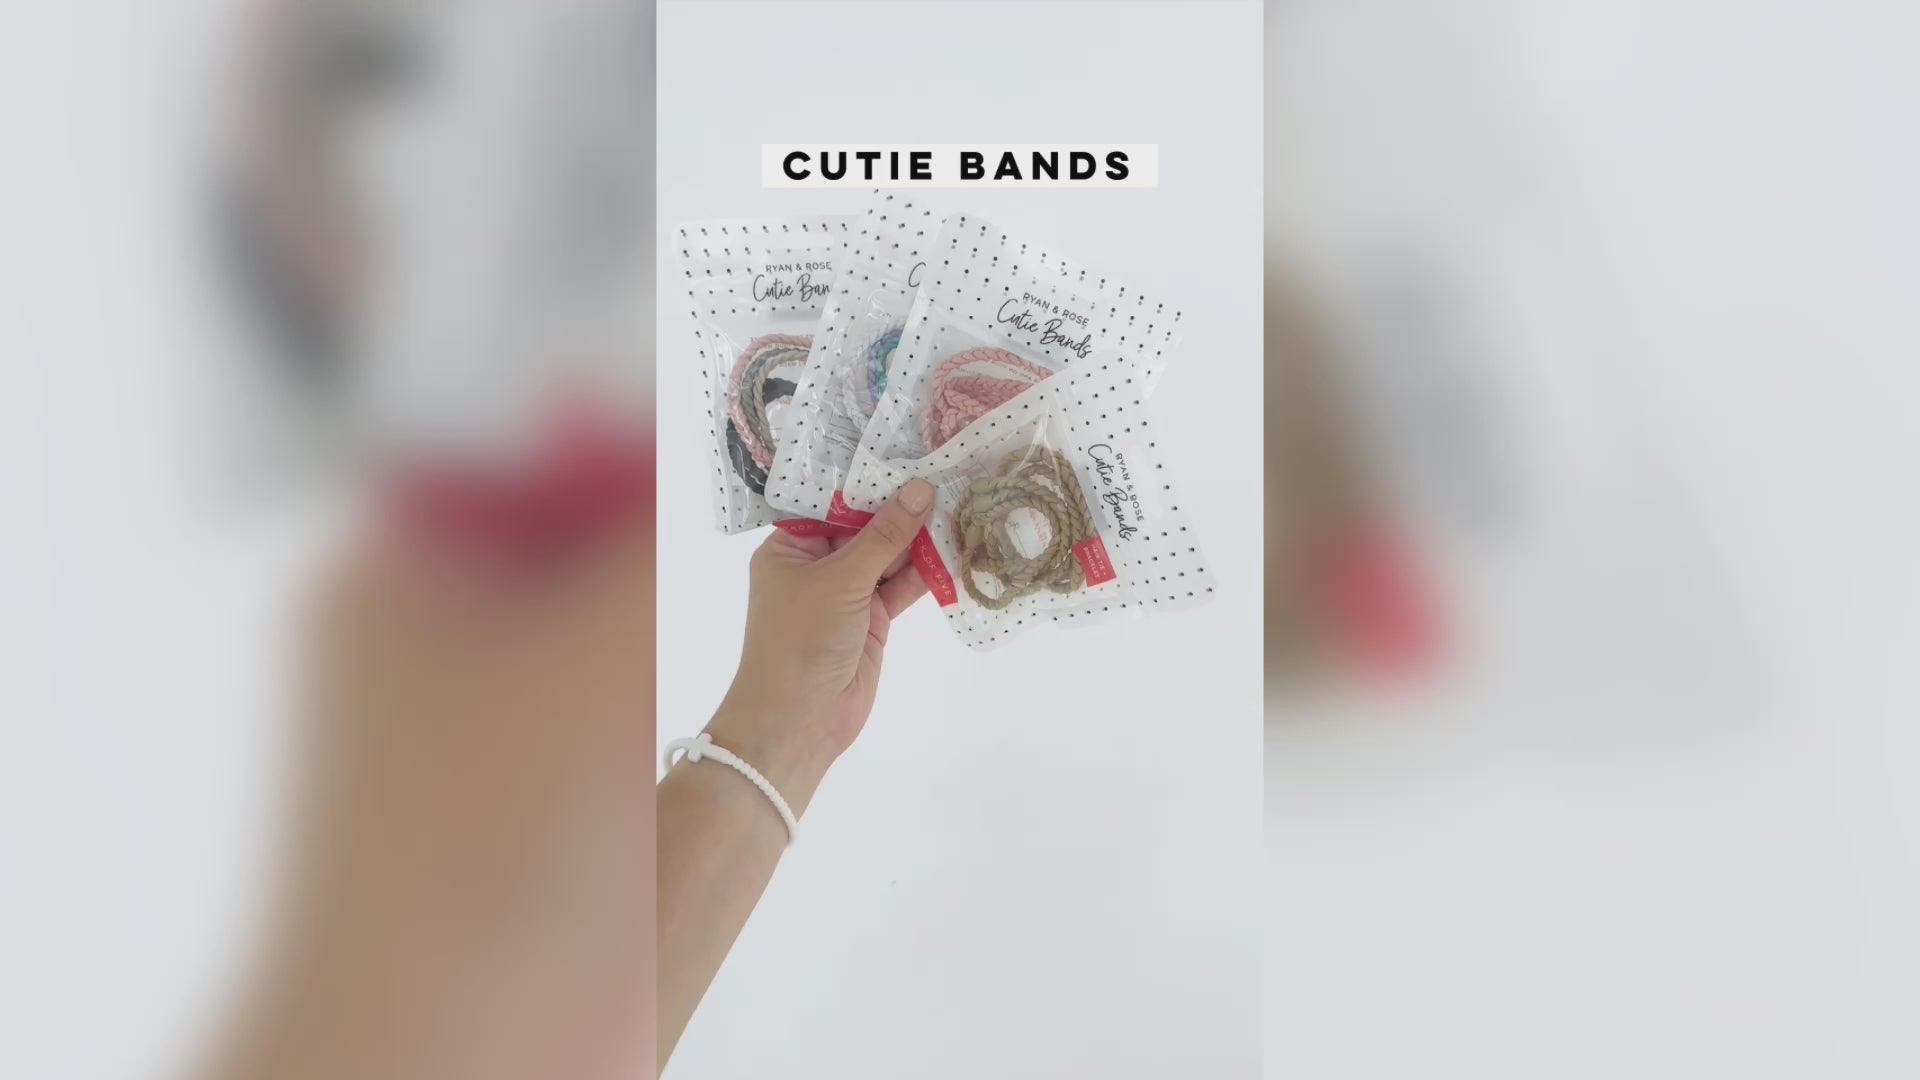 Load video: Cutie Bands video